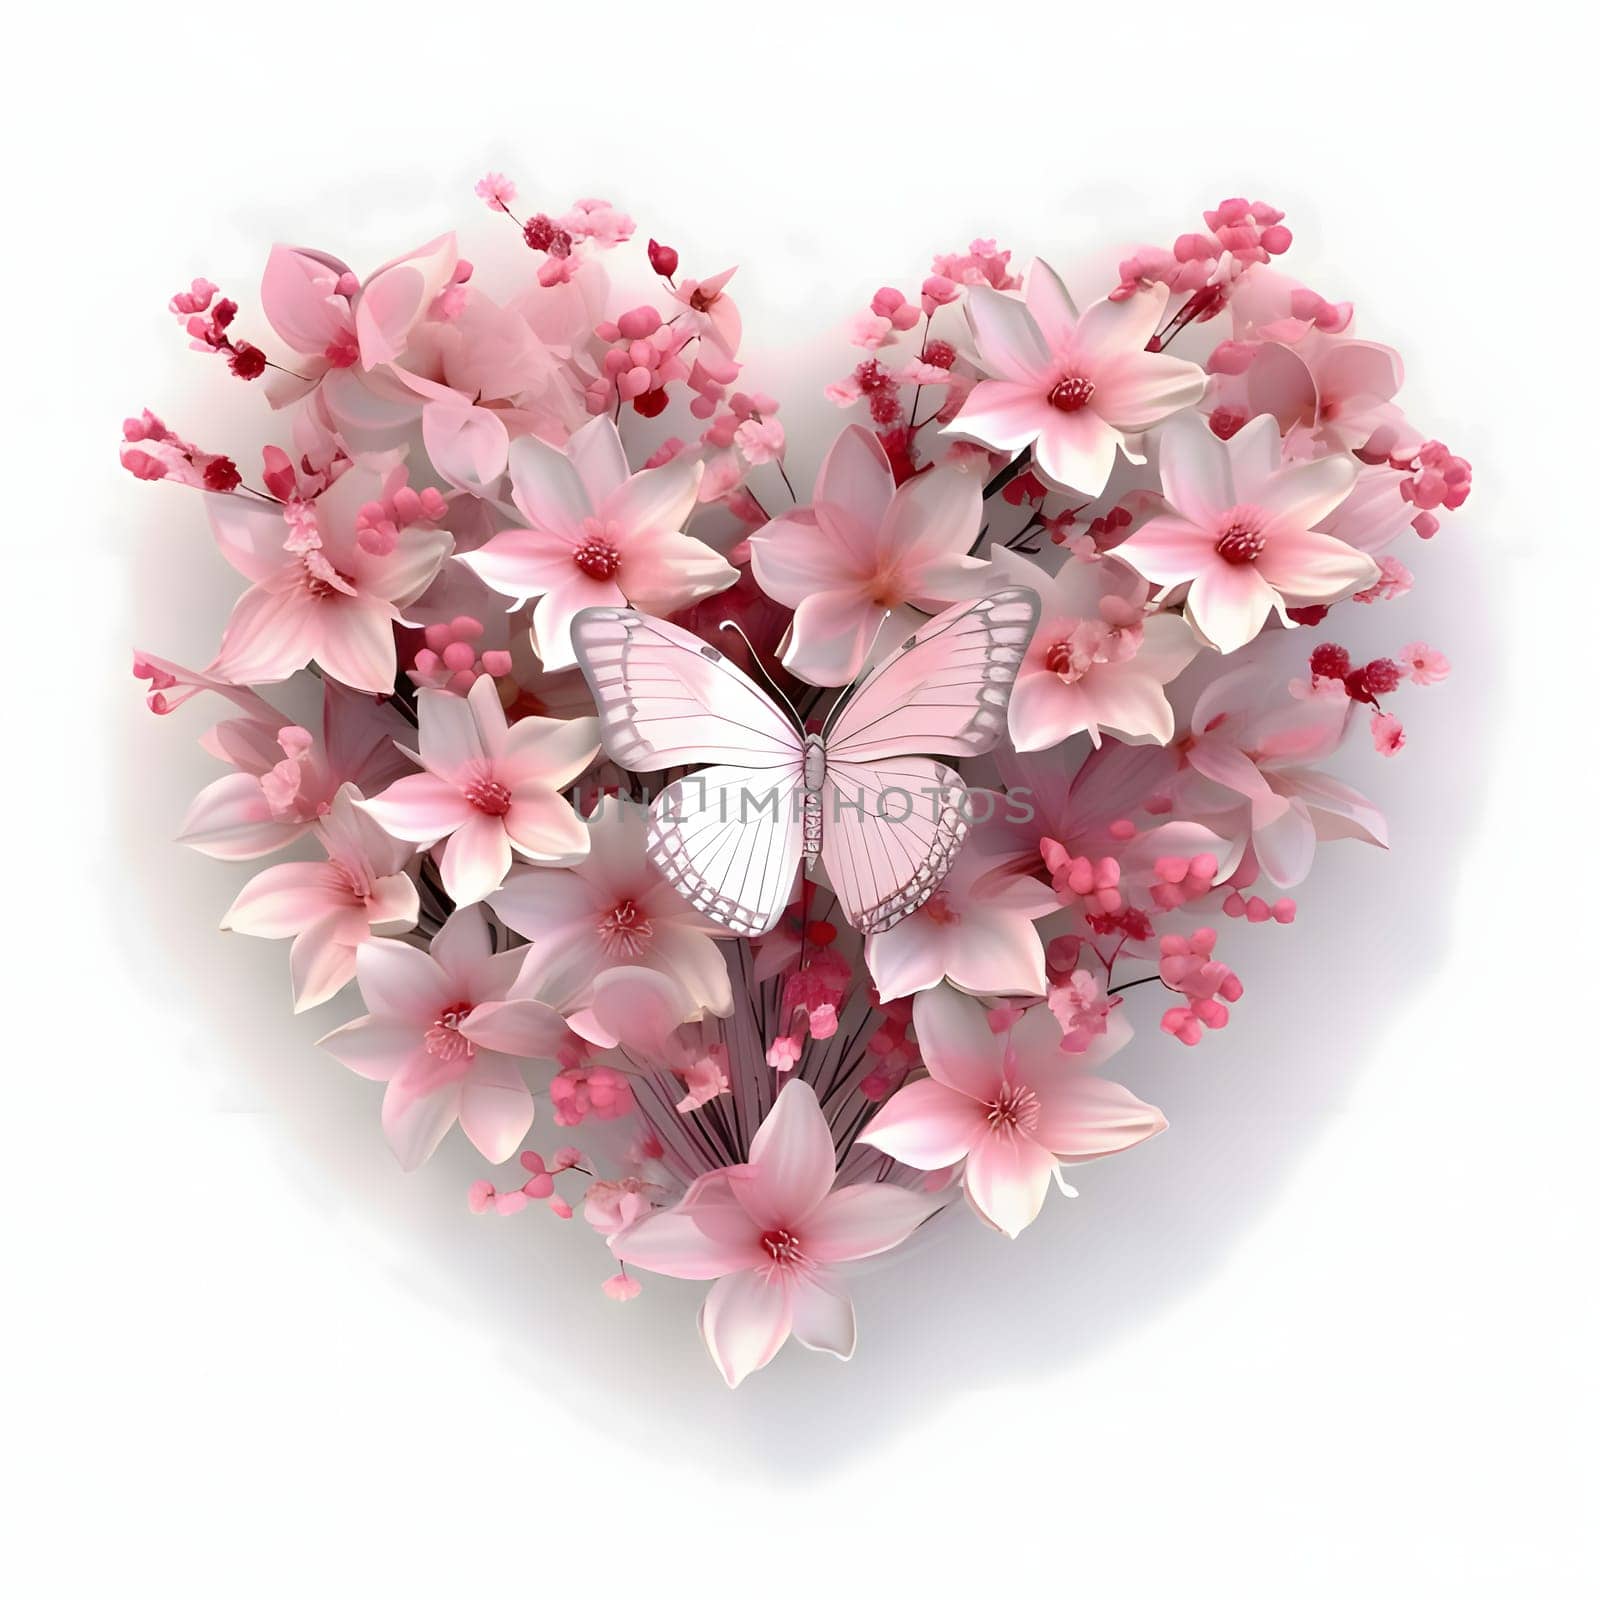 White and pink flowers, cherry blossoms and butterflies forming a heart on a white isolated background. Heart as a symbol of affection and love. The time of falling in love and love.